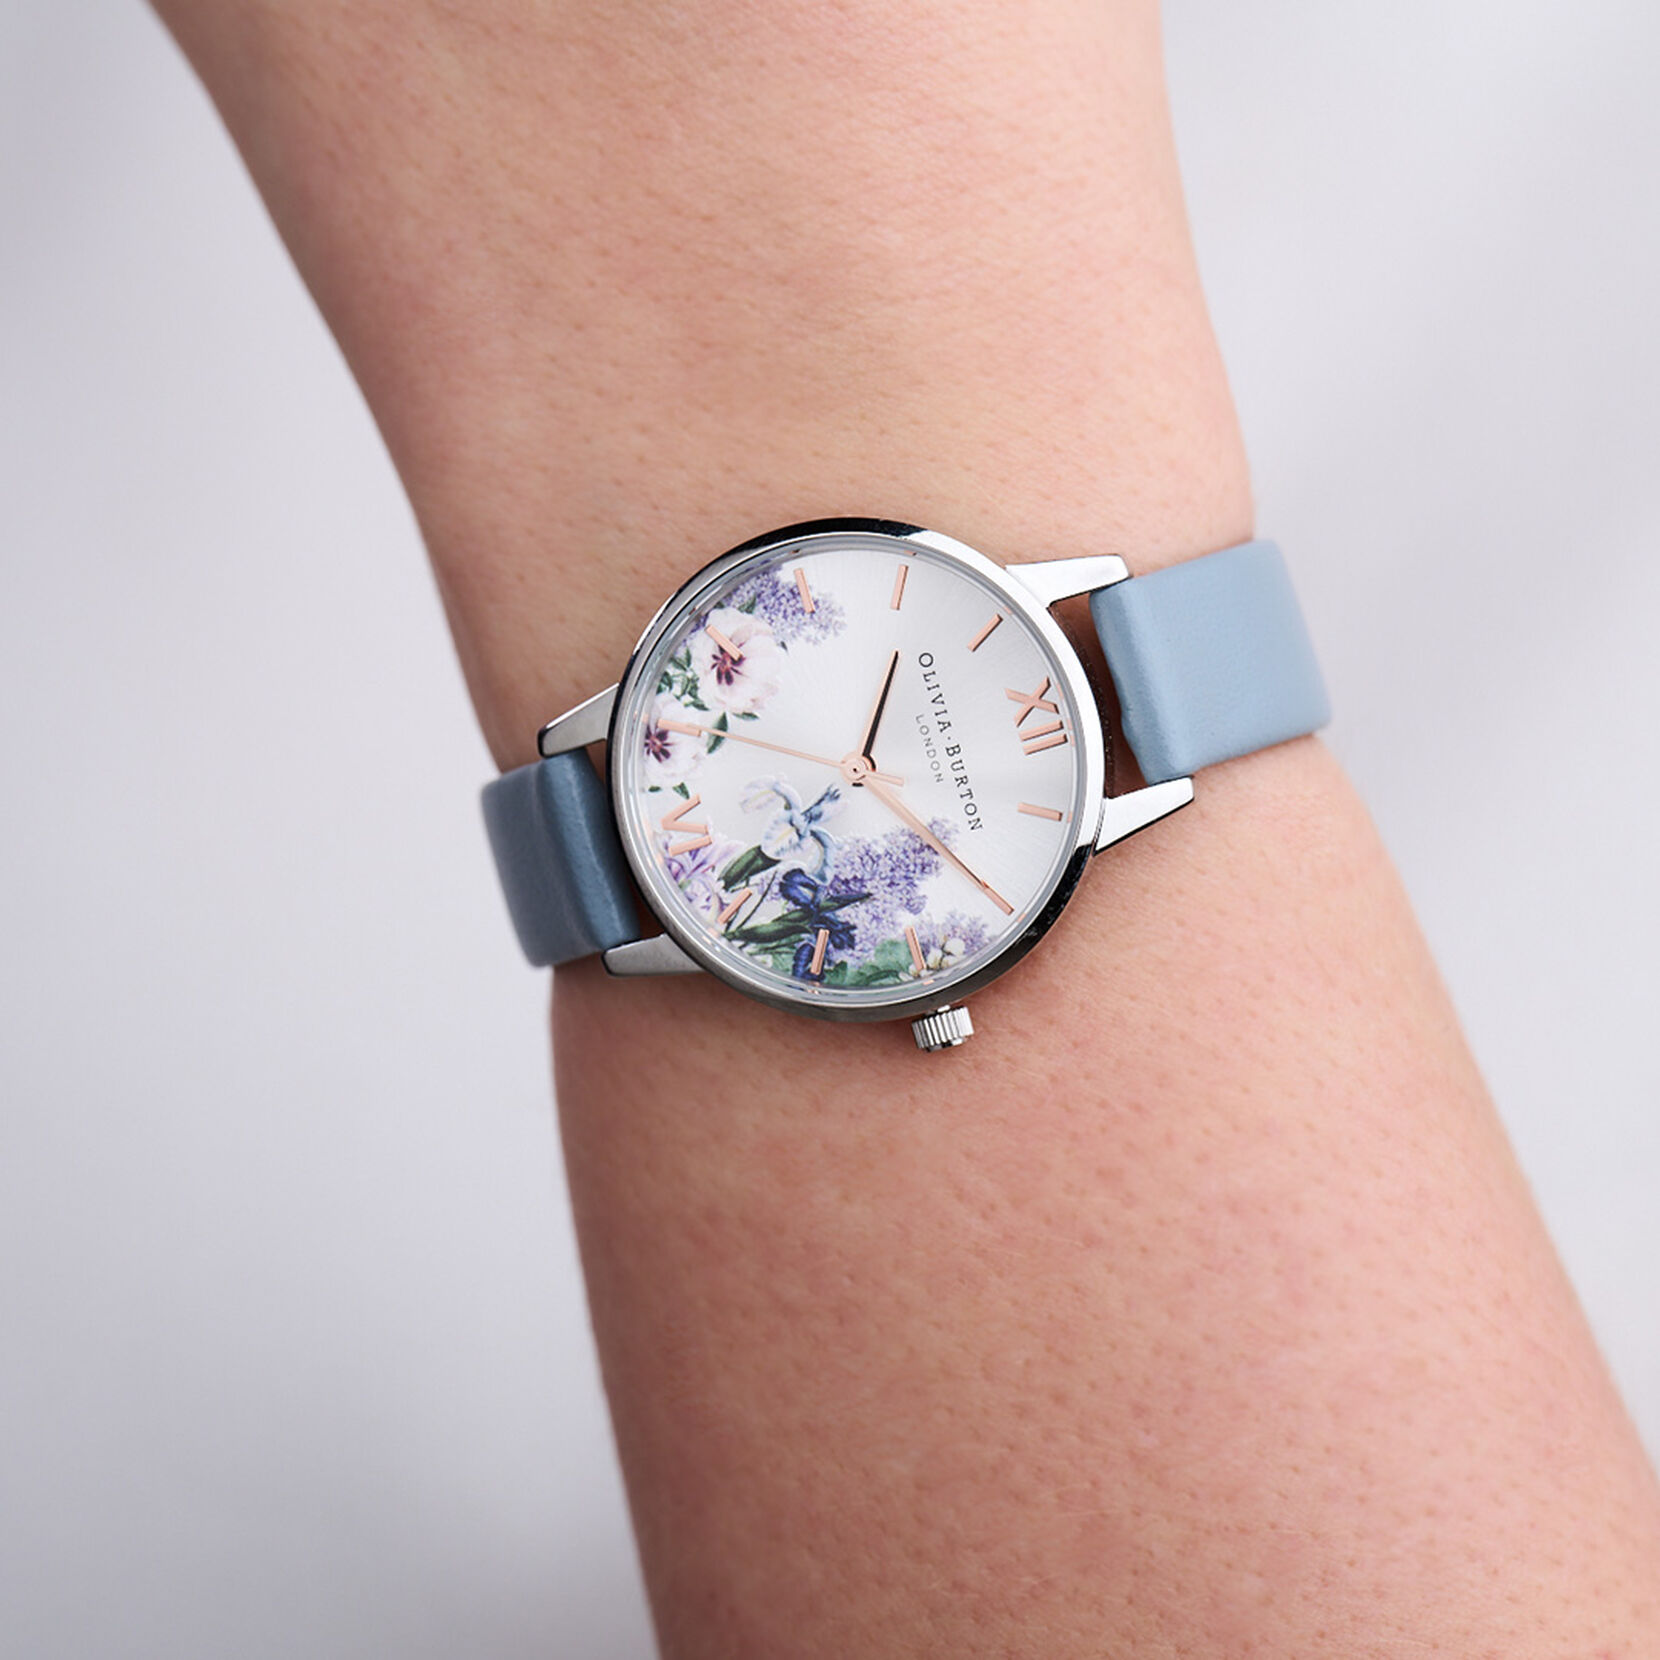 30mm Silver & Blue Leather Strap Watch